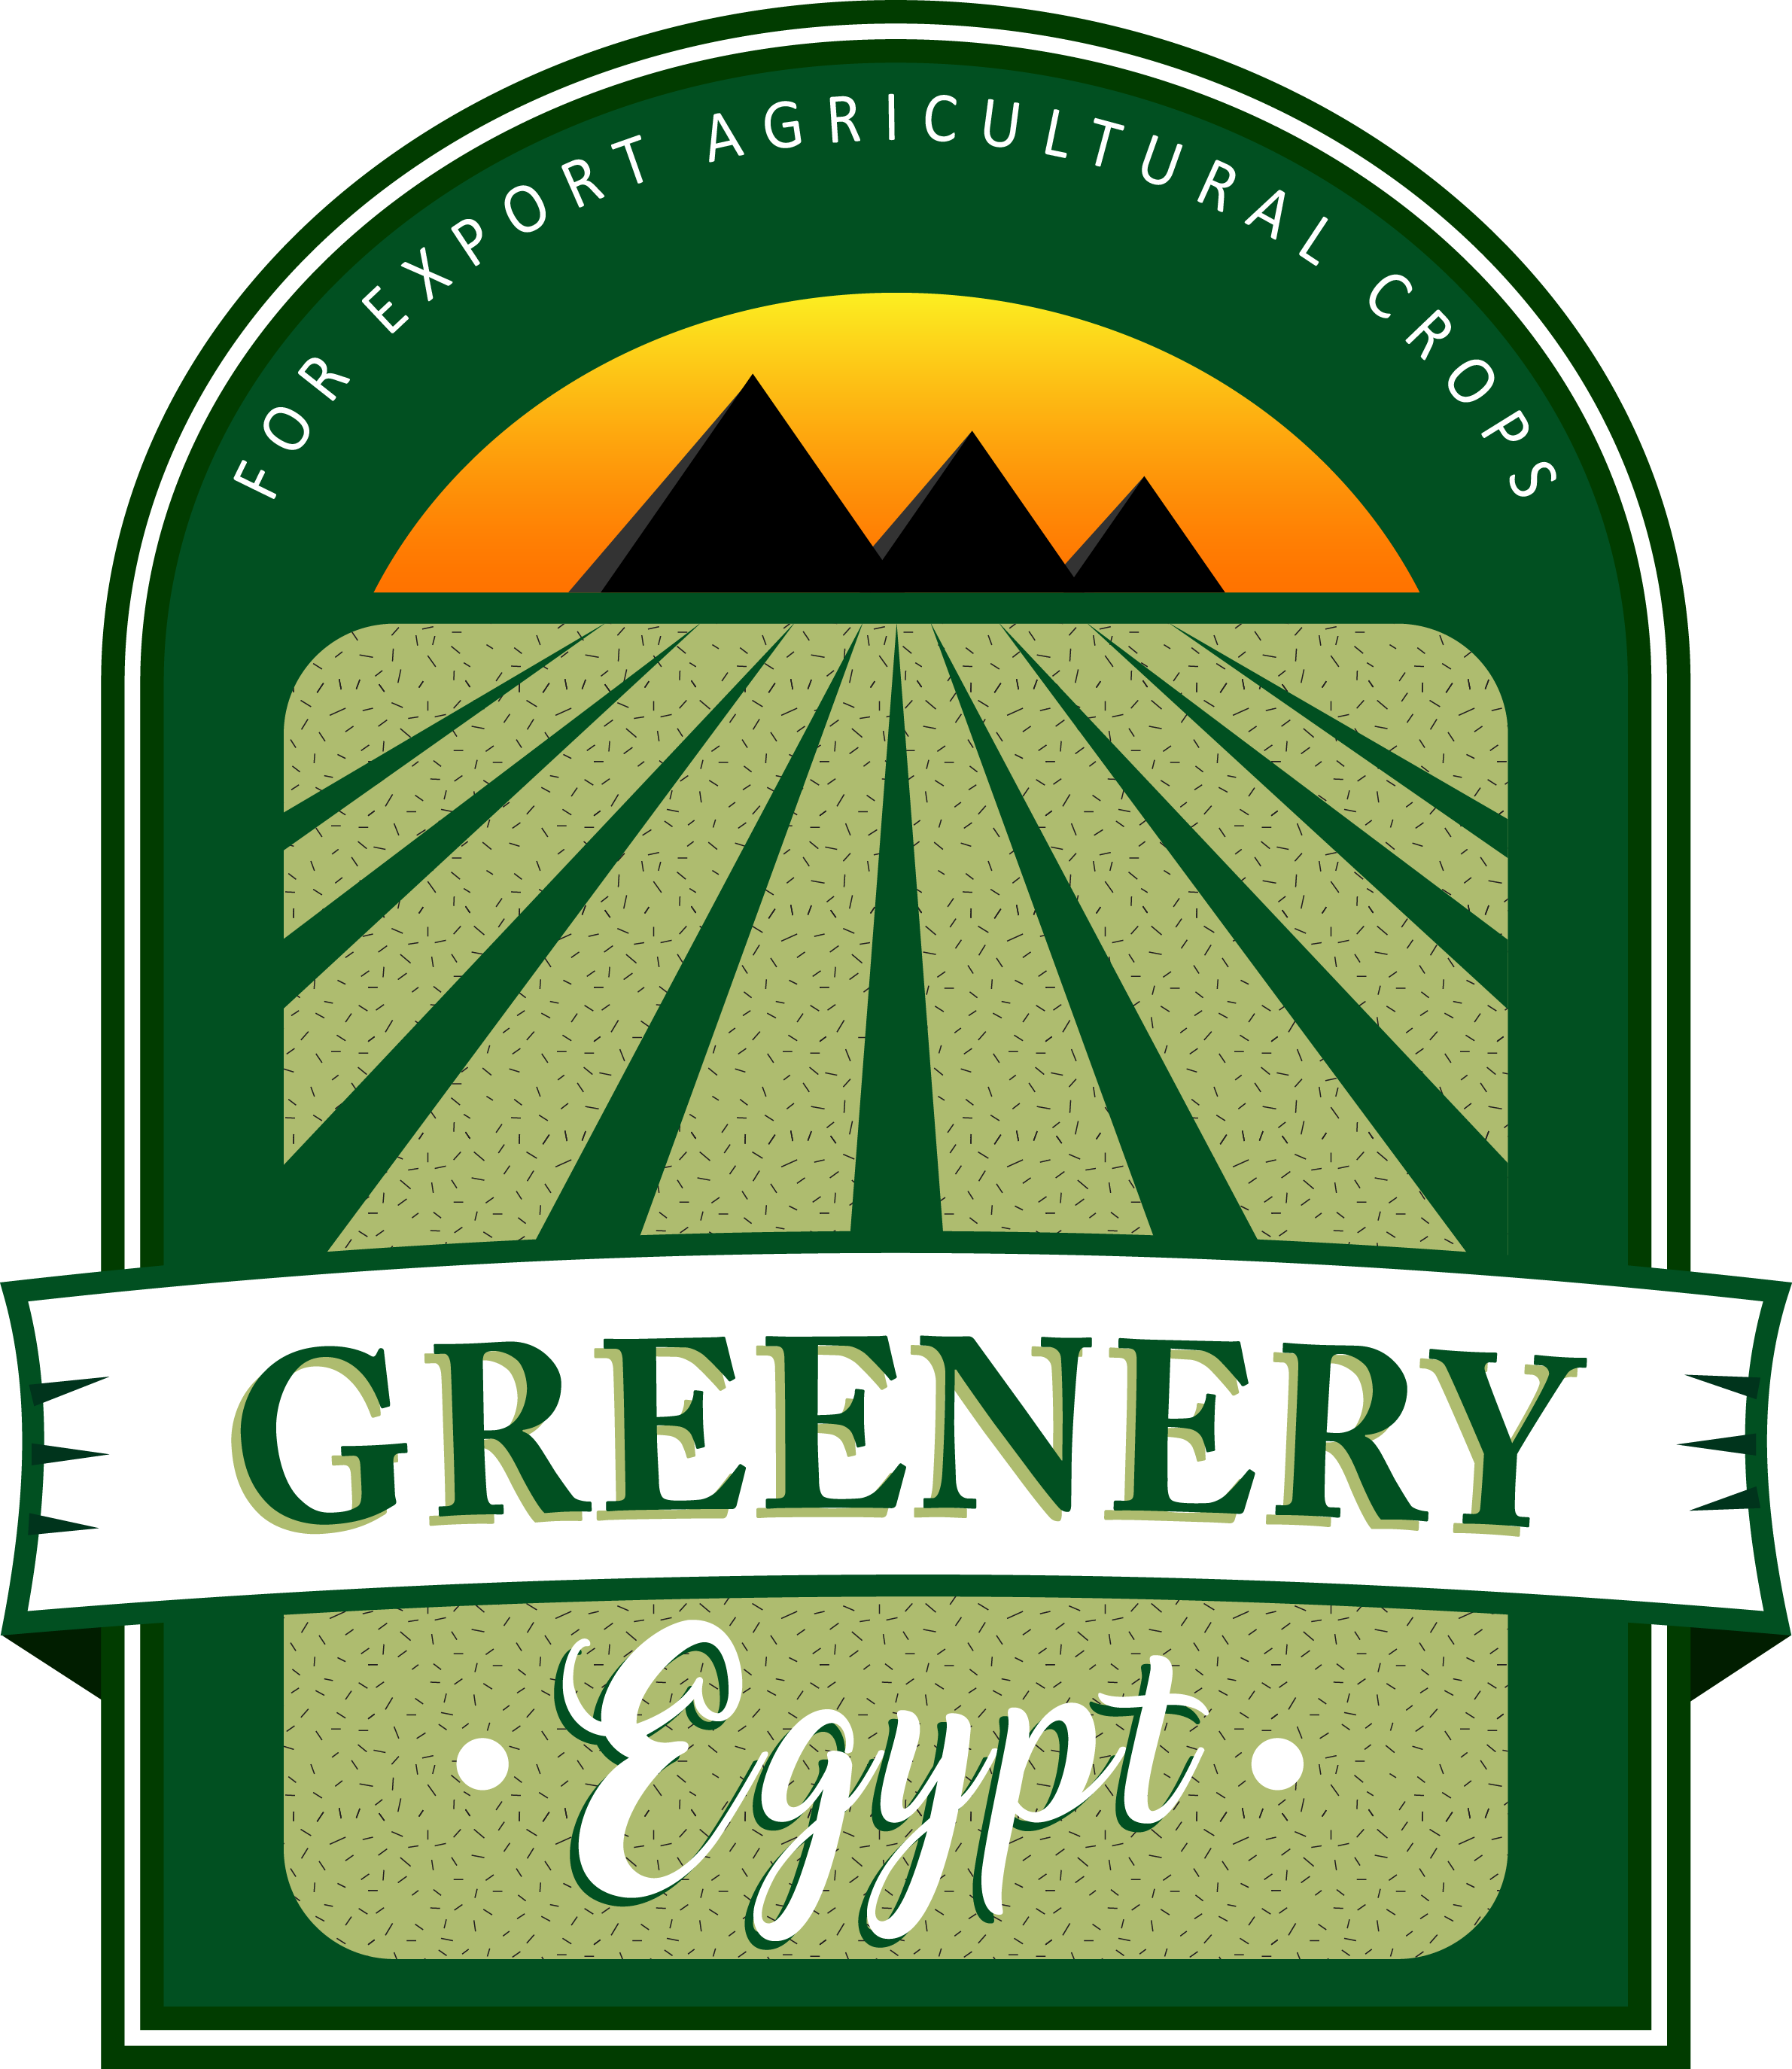 Greenery Egypt for export agricultural crops